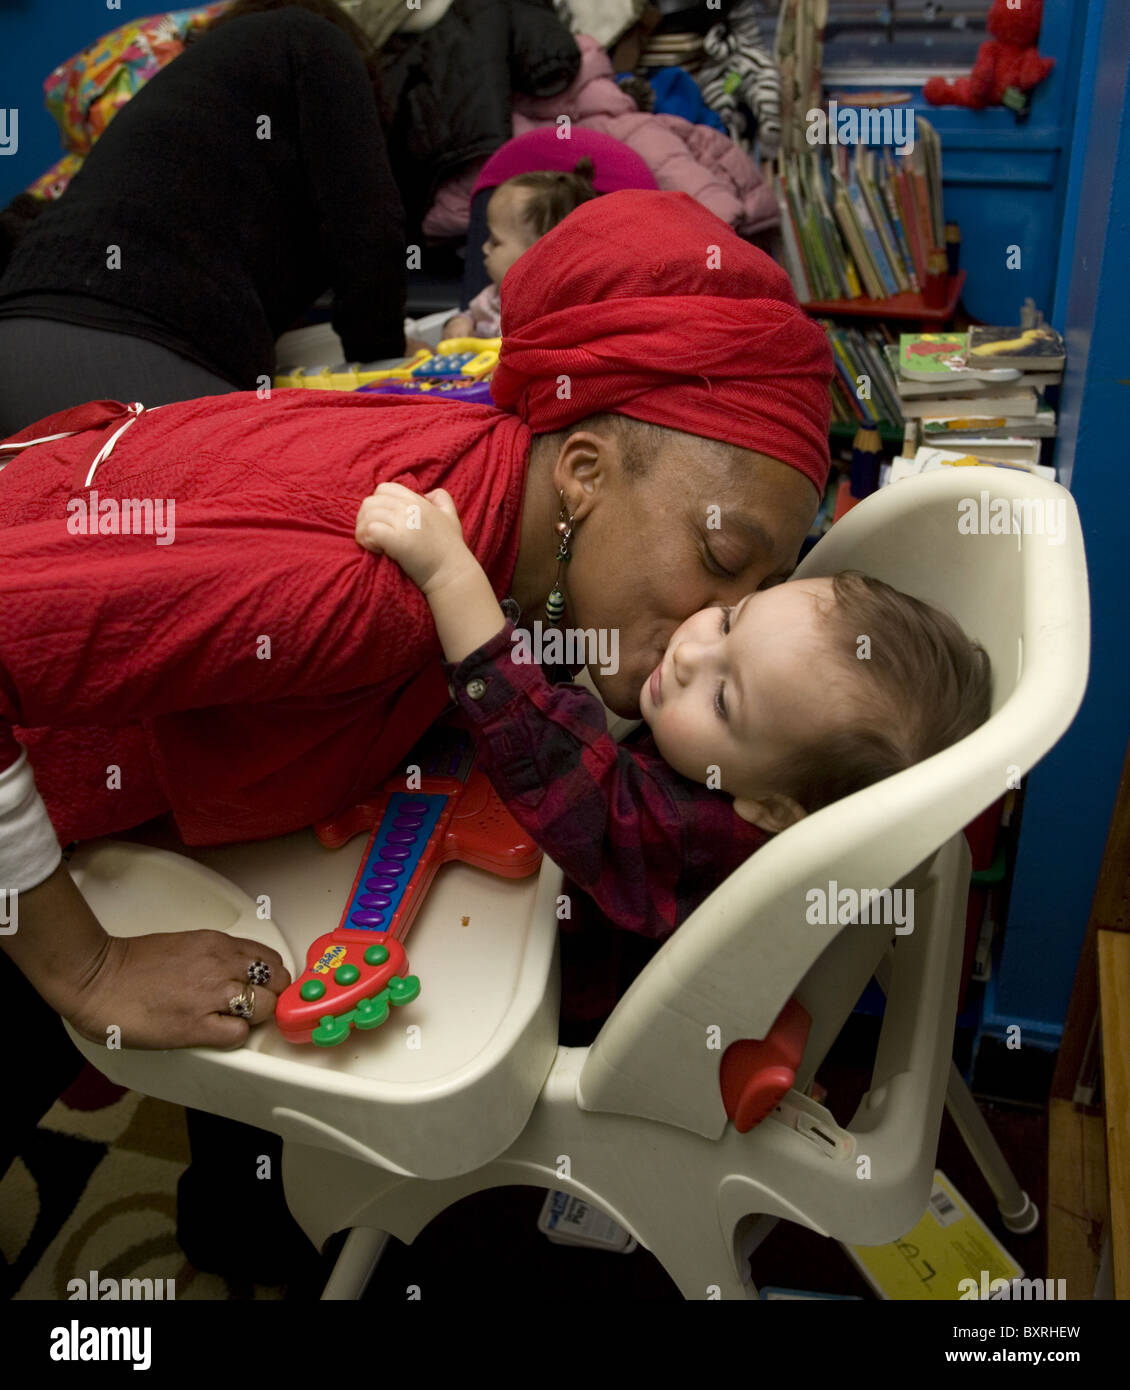 Babies and young children in all day care need love and affection. Childcare preschool in Brooklyn, NY. Stock Photo